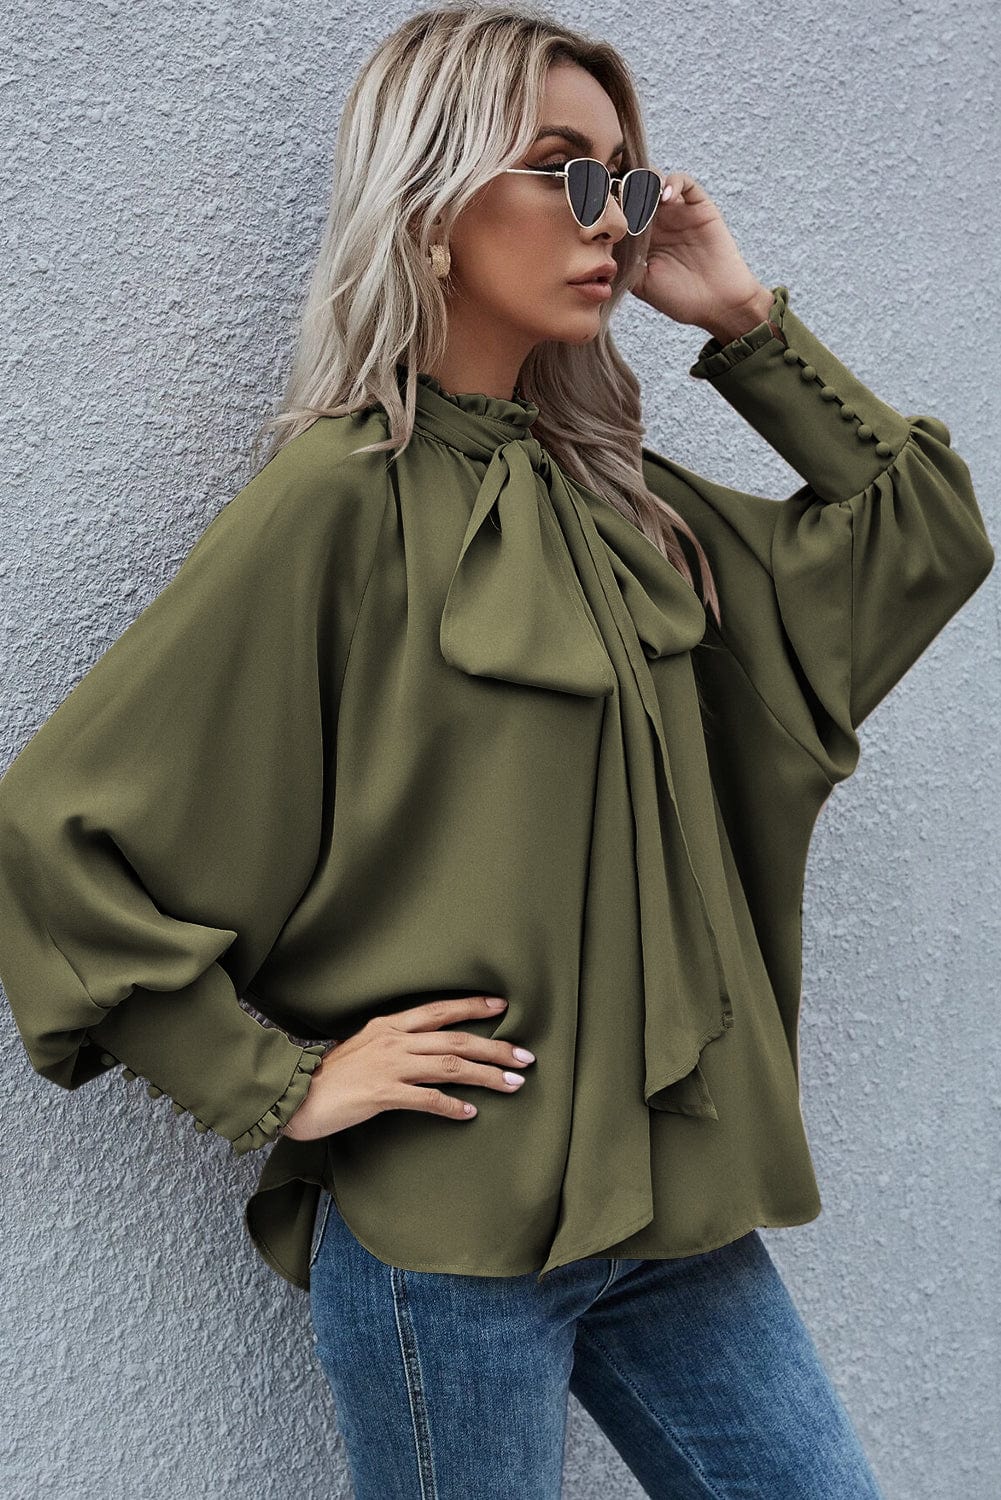 The802Gypsy  Tops Traveling Gypsy Frilled Mock Neck Bishop Sleeve Blouse